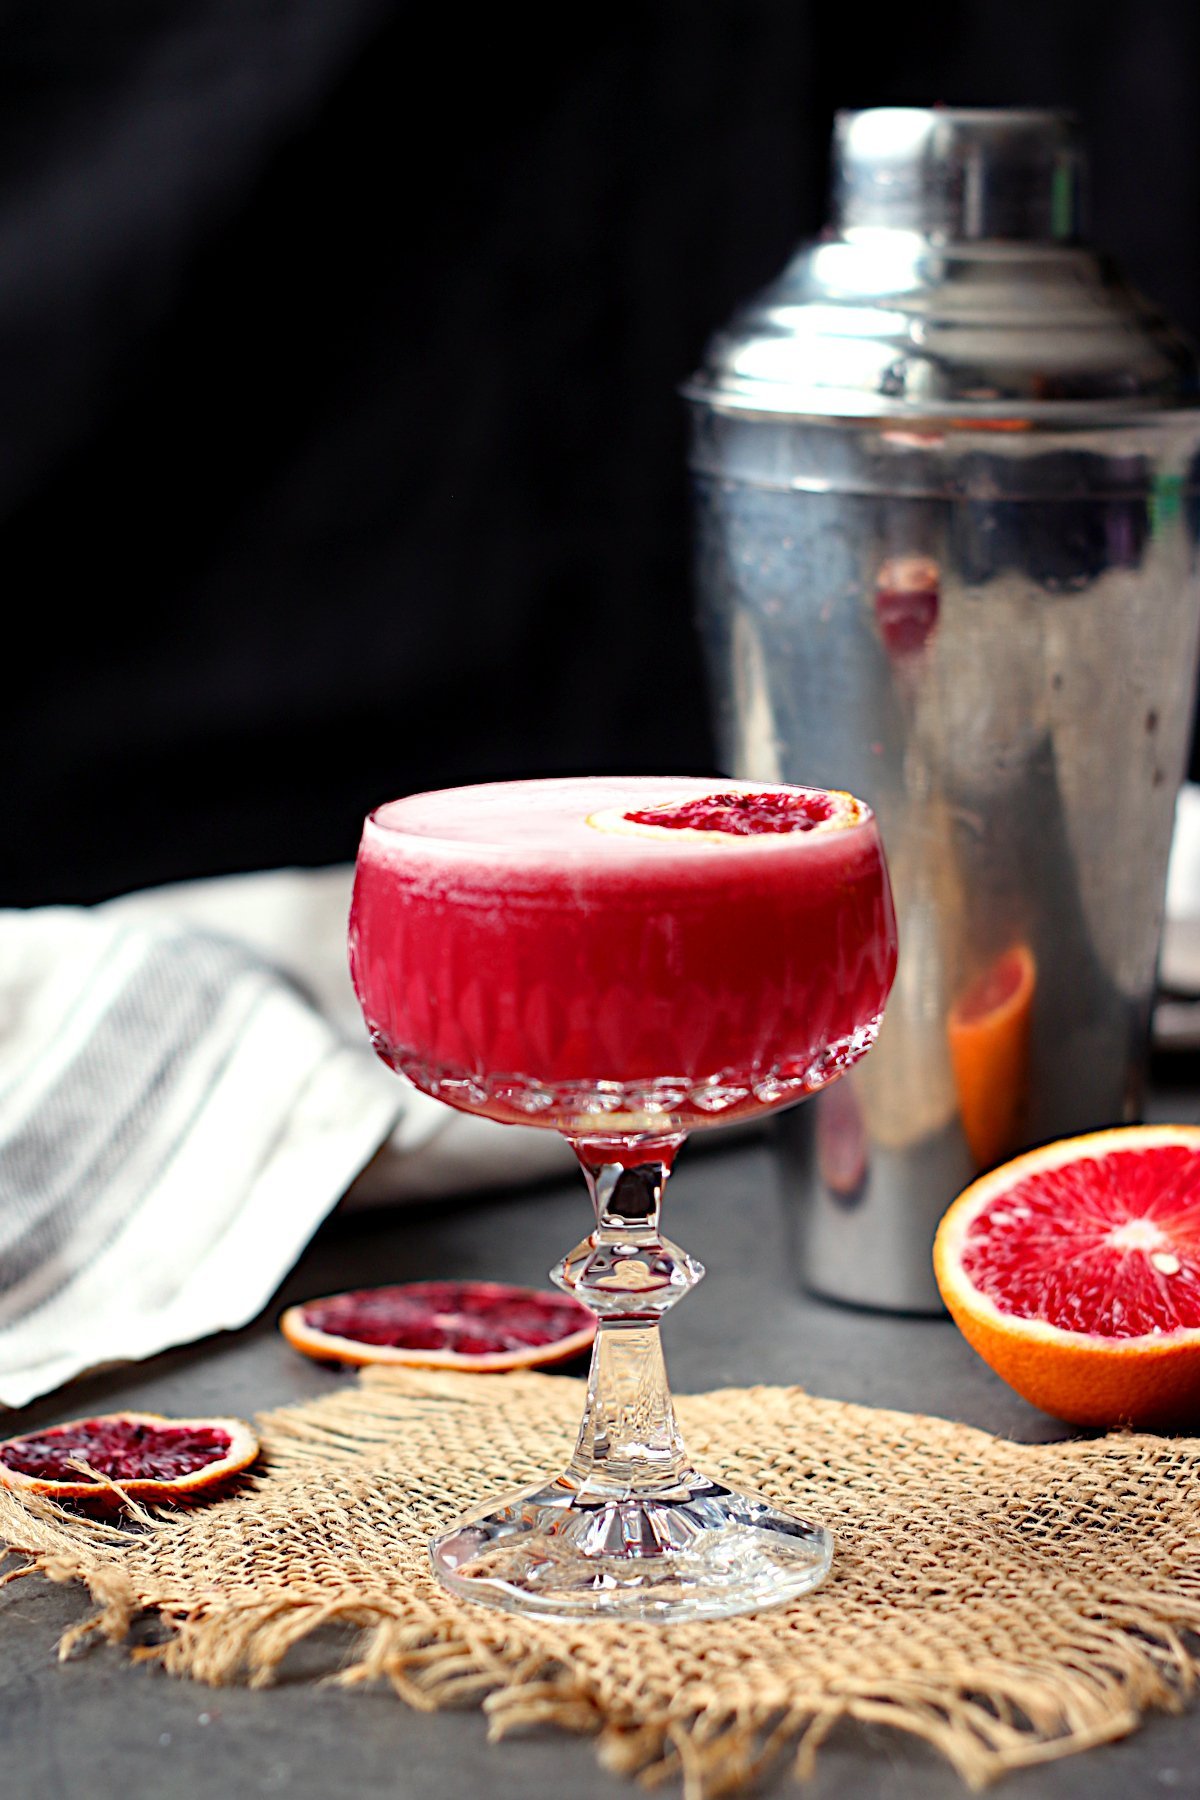 Blood orange whisky sour mocktail garnished with a dried blood orange slice in a crystal coupe glass.